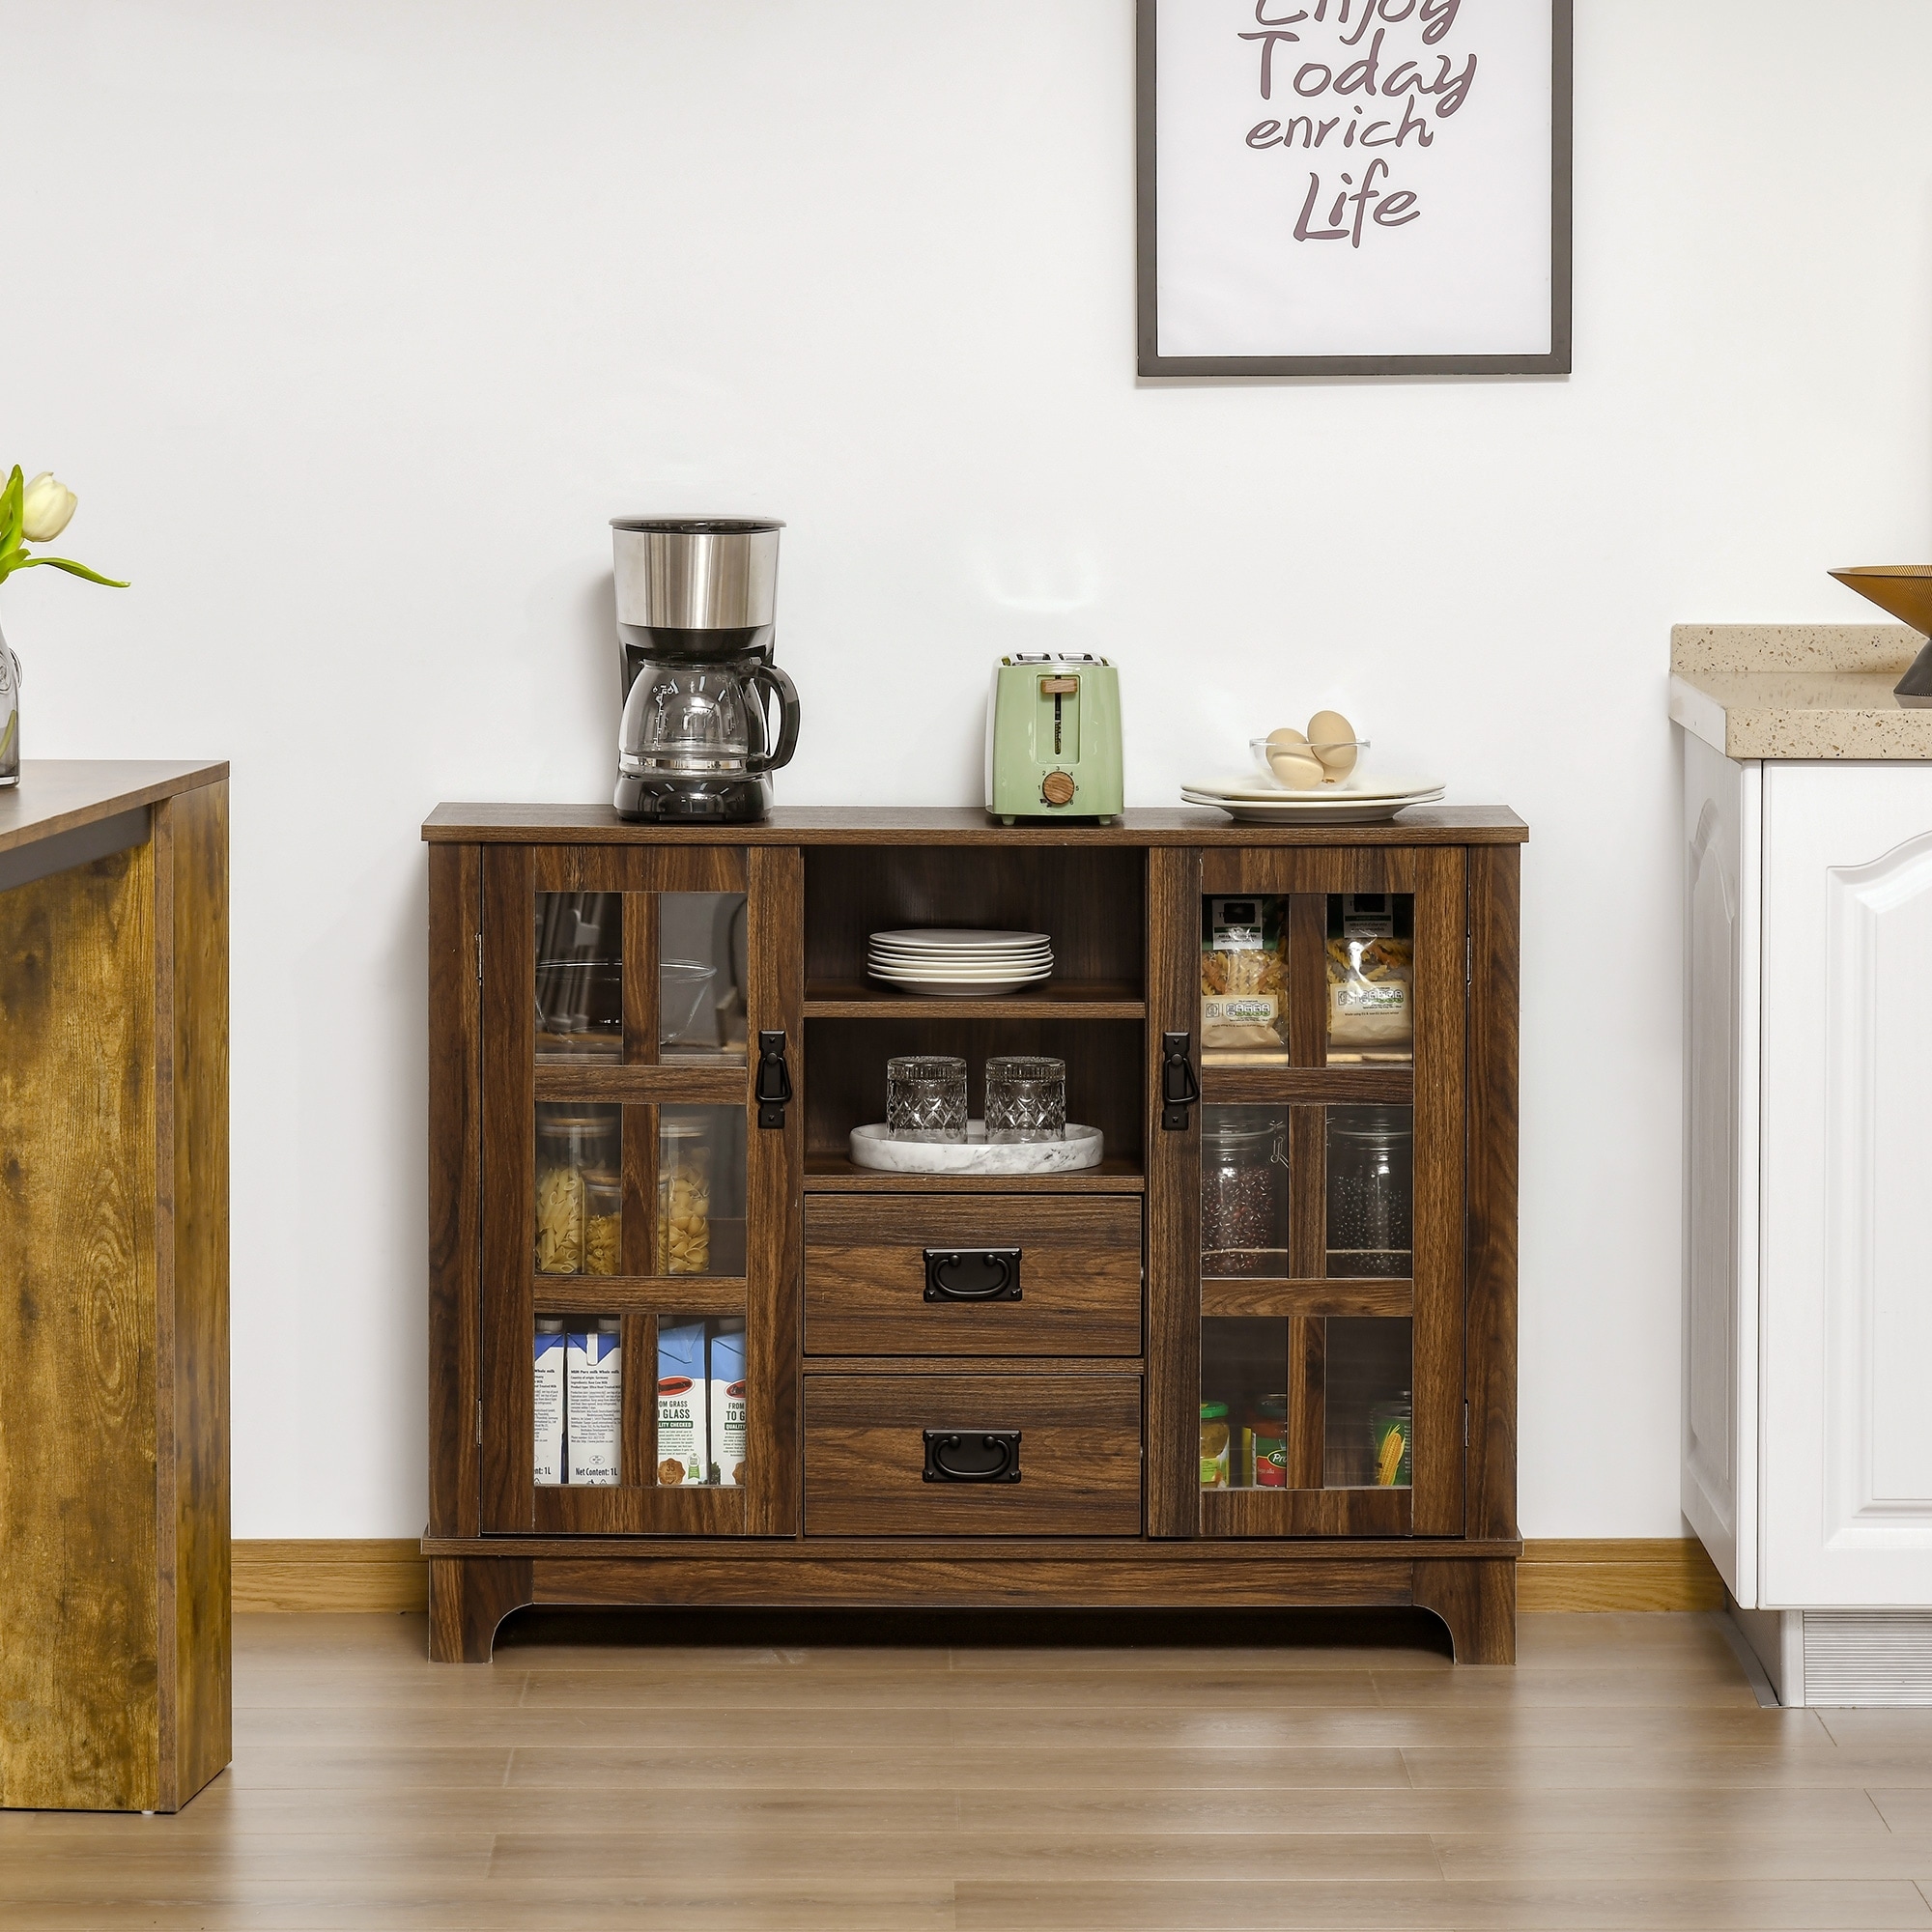 https://ak1.ostkcdn.com/images/products/is/images/direct/456540a2cddff74fbdf250f44658e1ab87a3f920/HOMCOM-Sideboard-Storage-Cabinet%2C-Kitchen-Cupboard-Buffet-Server-with-Glass-Doors%2C-2-Drawers-%26-Adjustable-Shelves.jpg